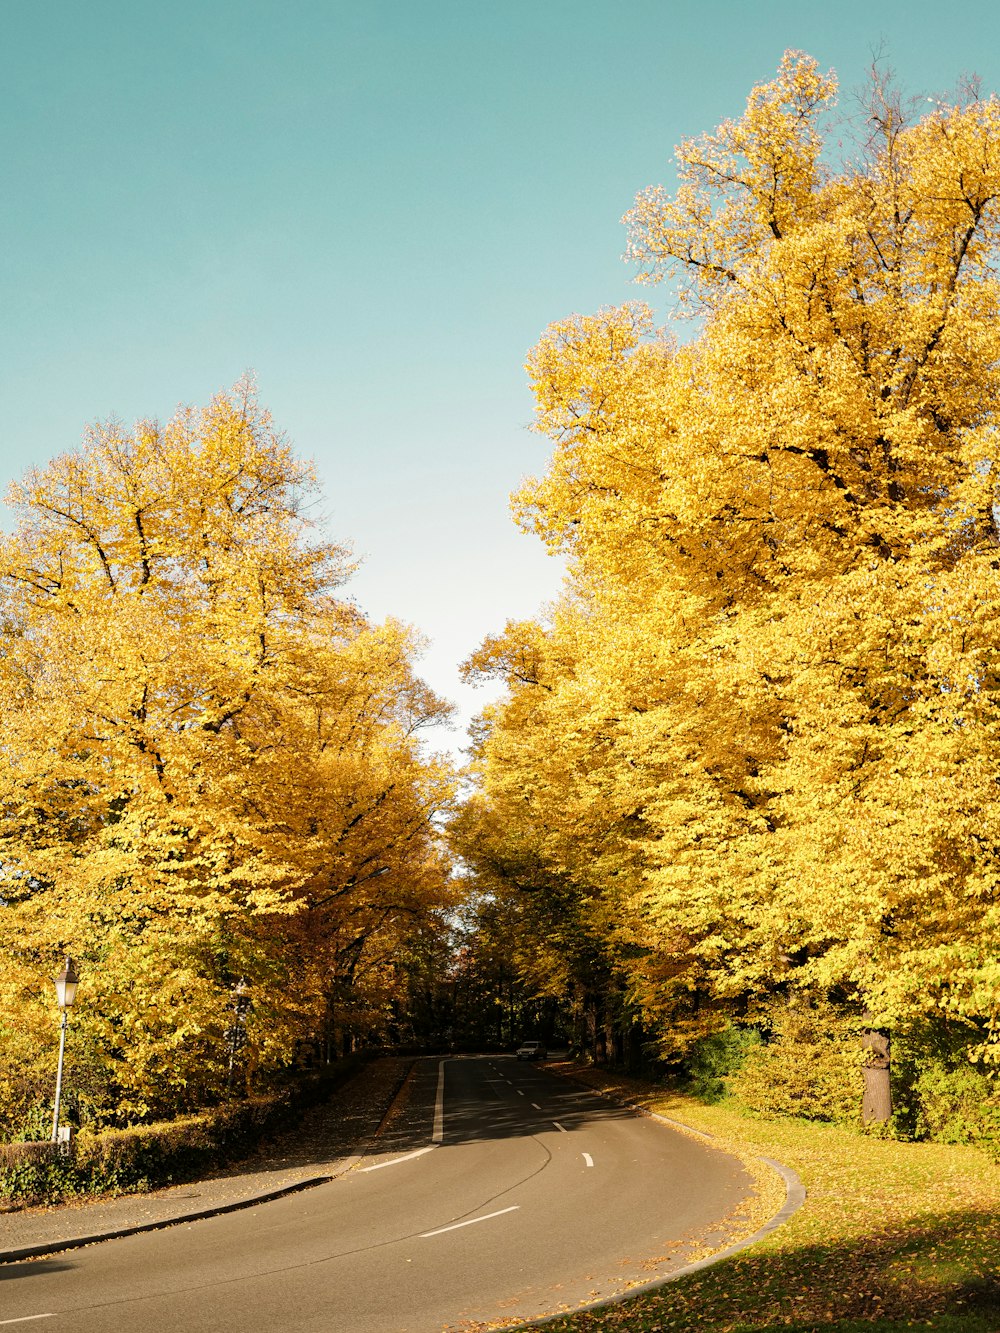 green and yellow trees beside gray concrete road during daytime